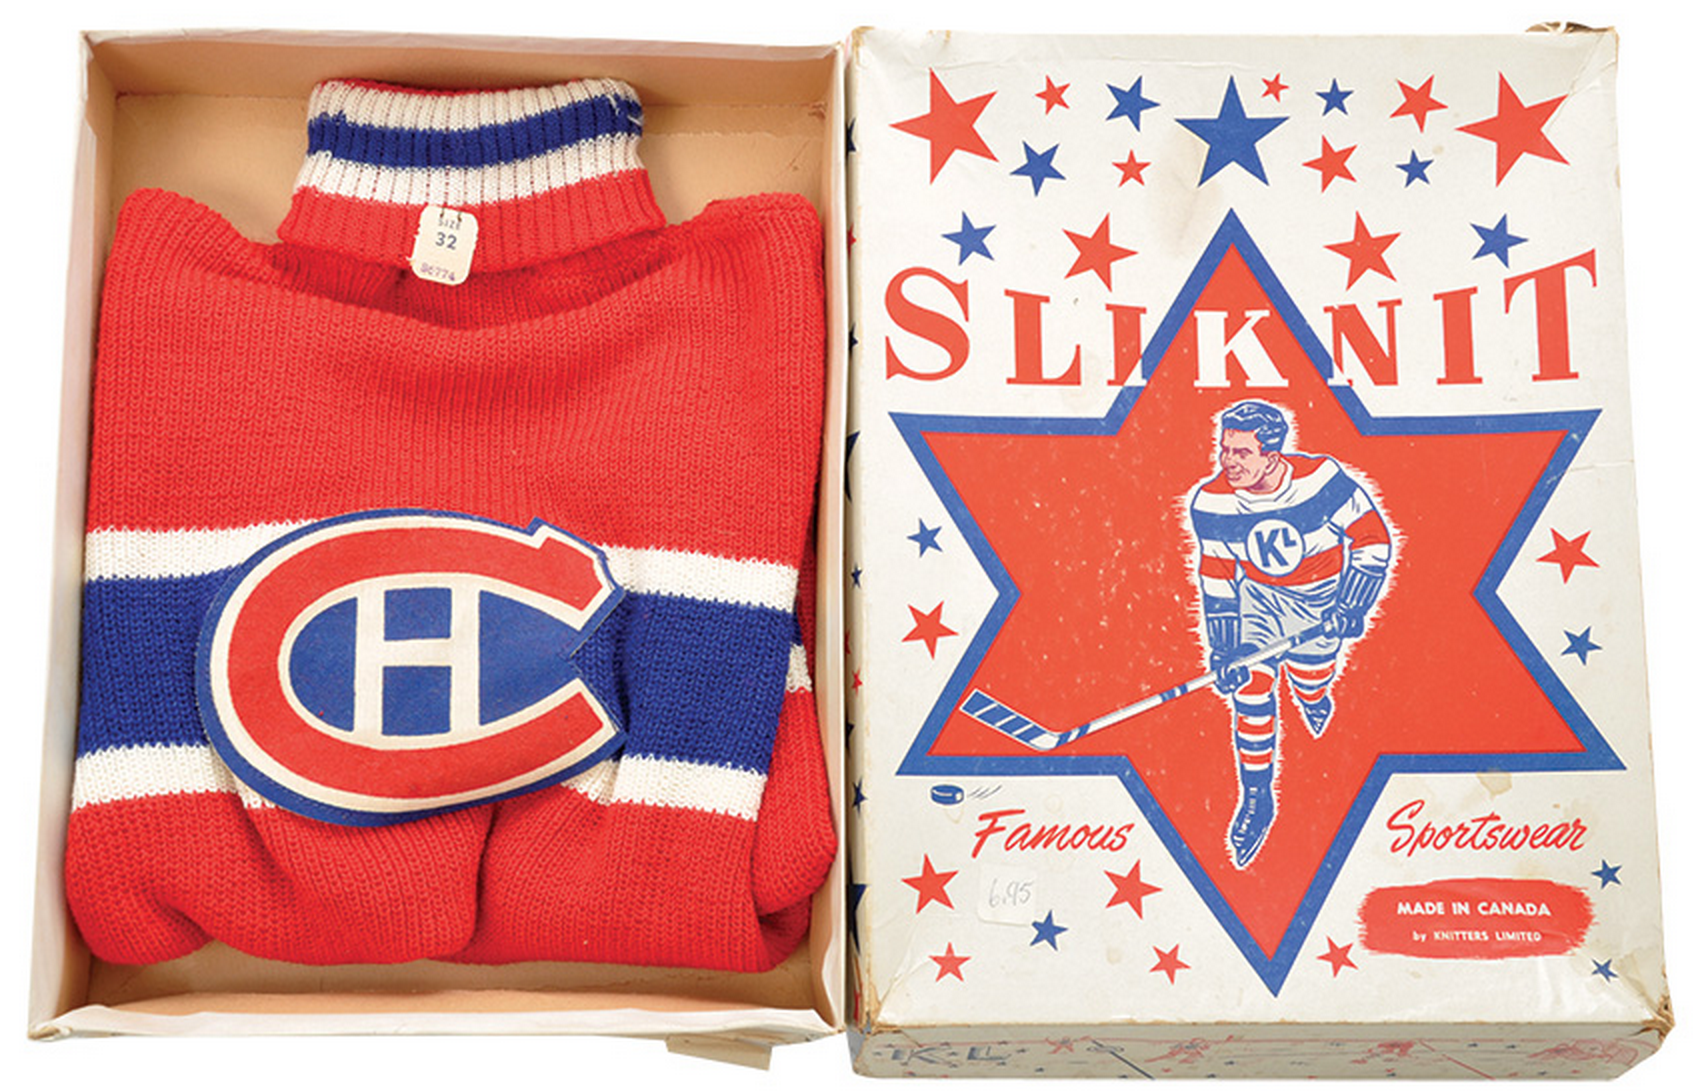 montreal canadiens kids jersey